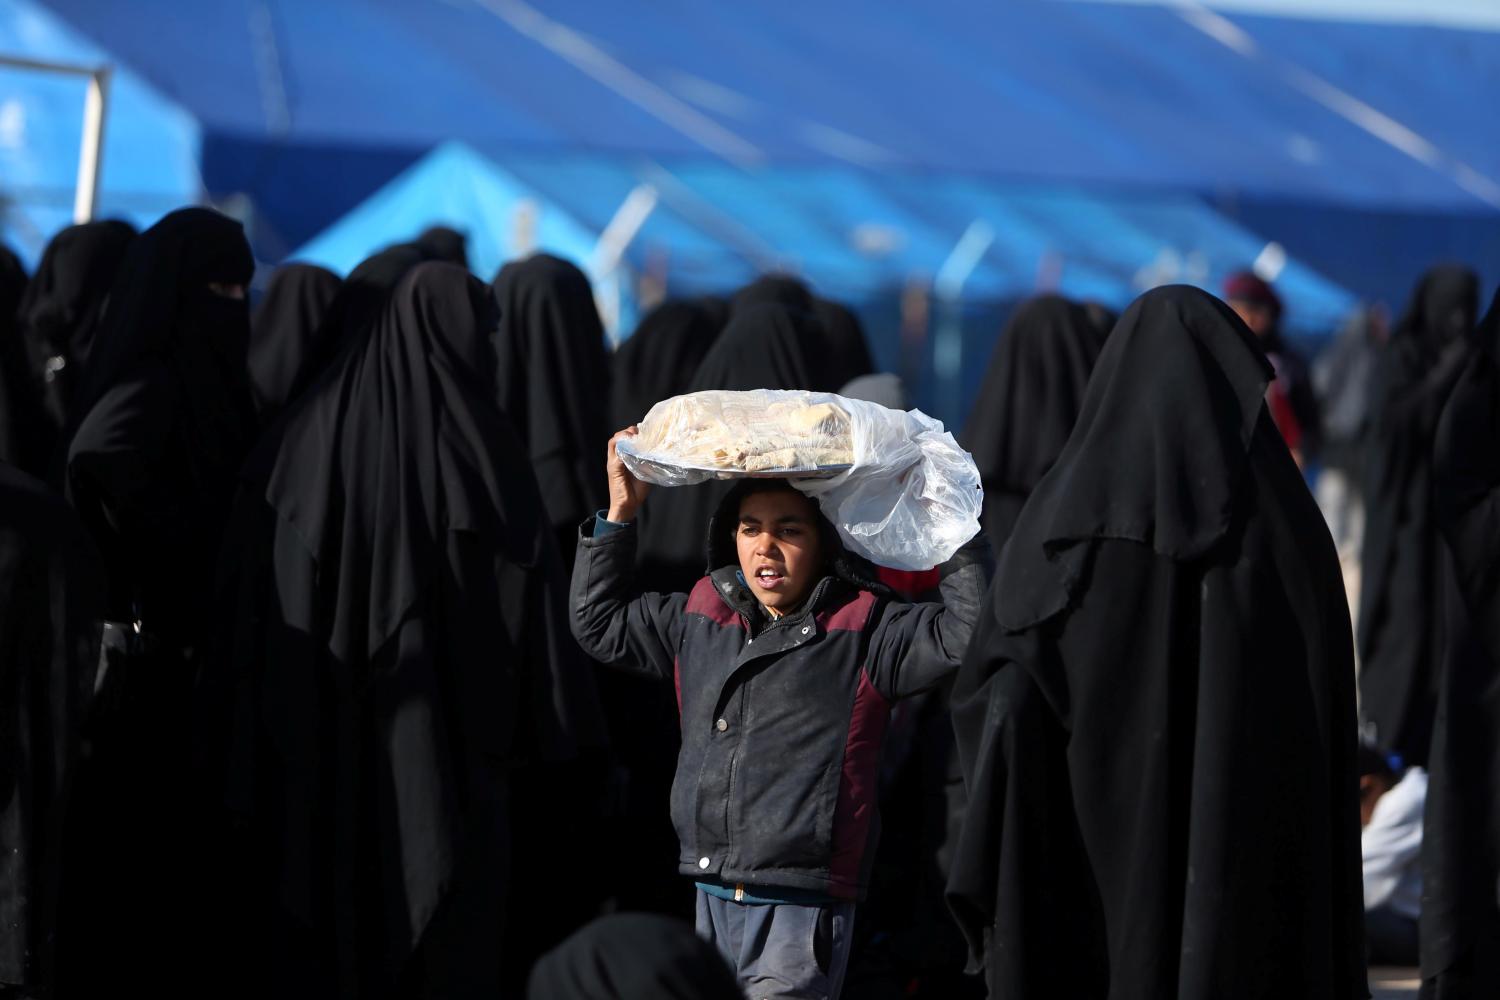 A boy carries bread on his head at al-Hol displacement camp in Hasaka governorate, Syria April 2, 2019. REUTERS/Ali Hashisho - RC1D6612CE50